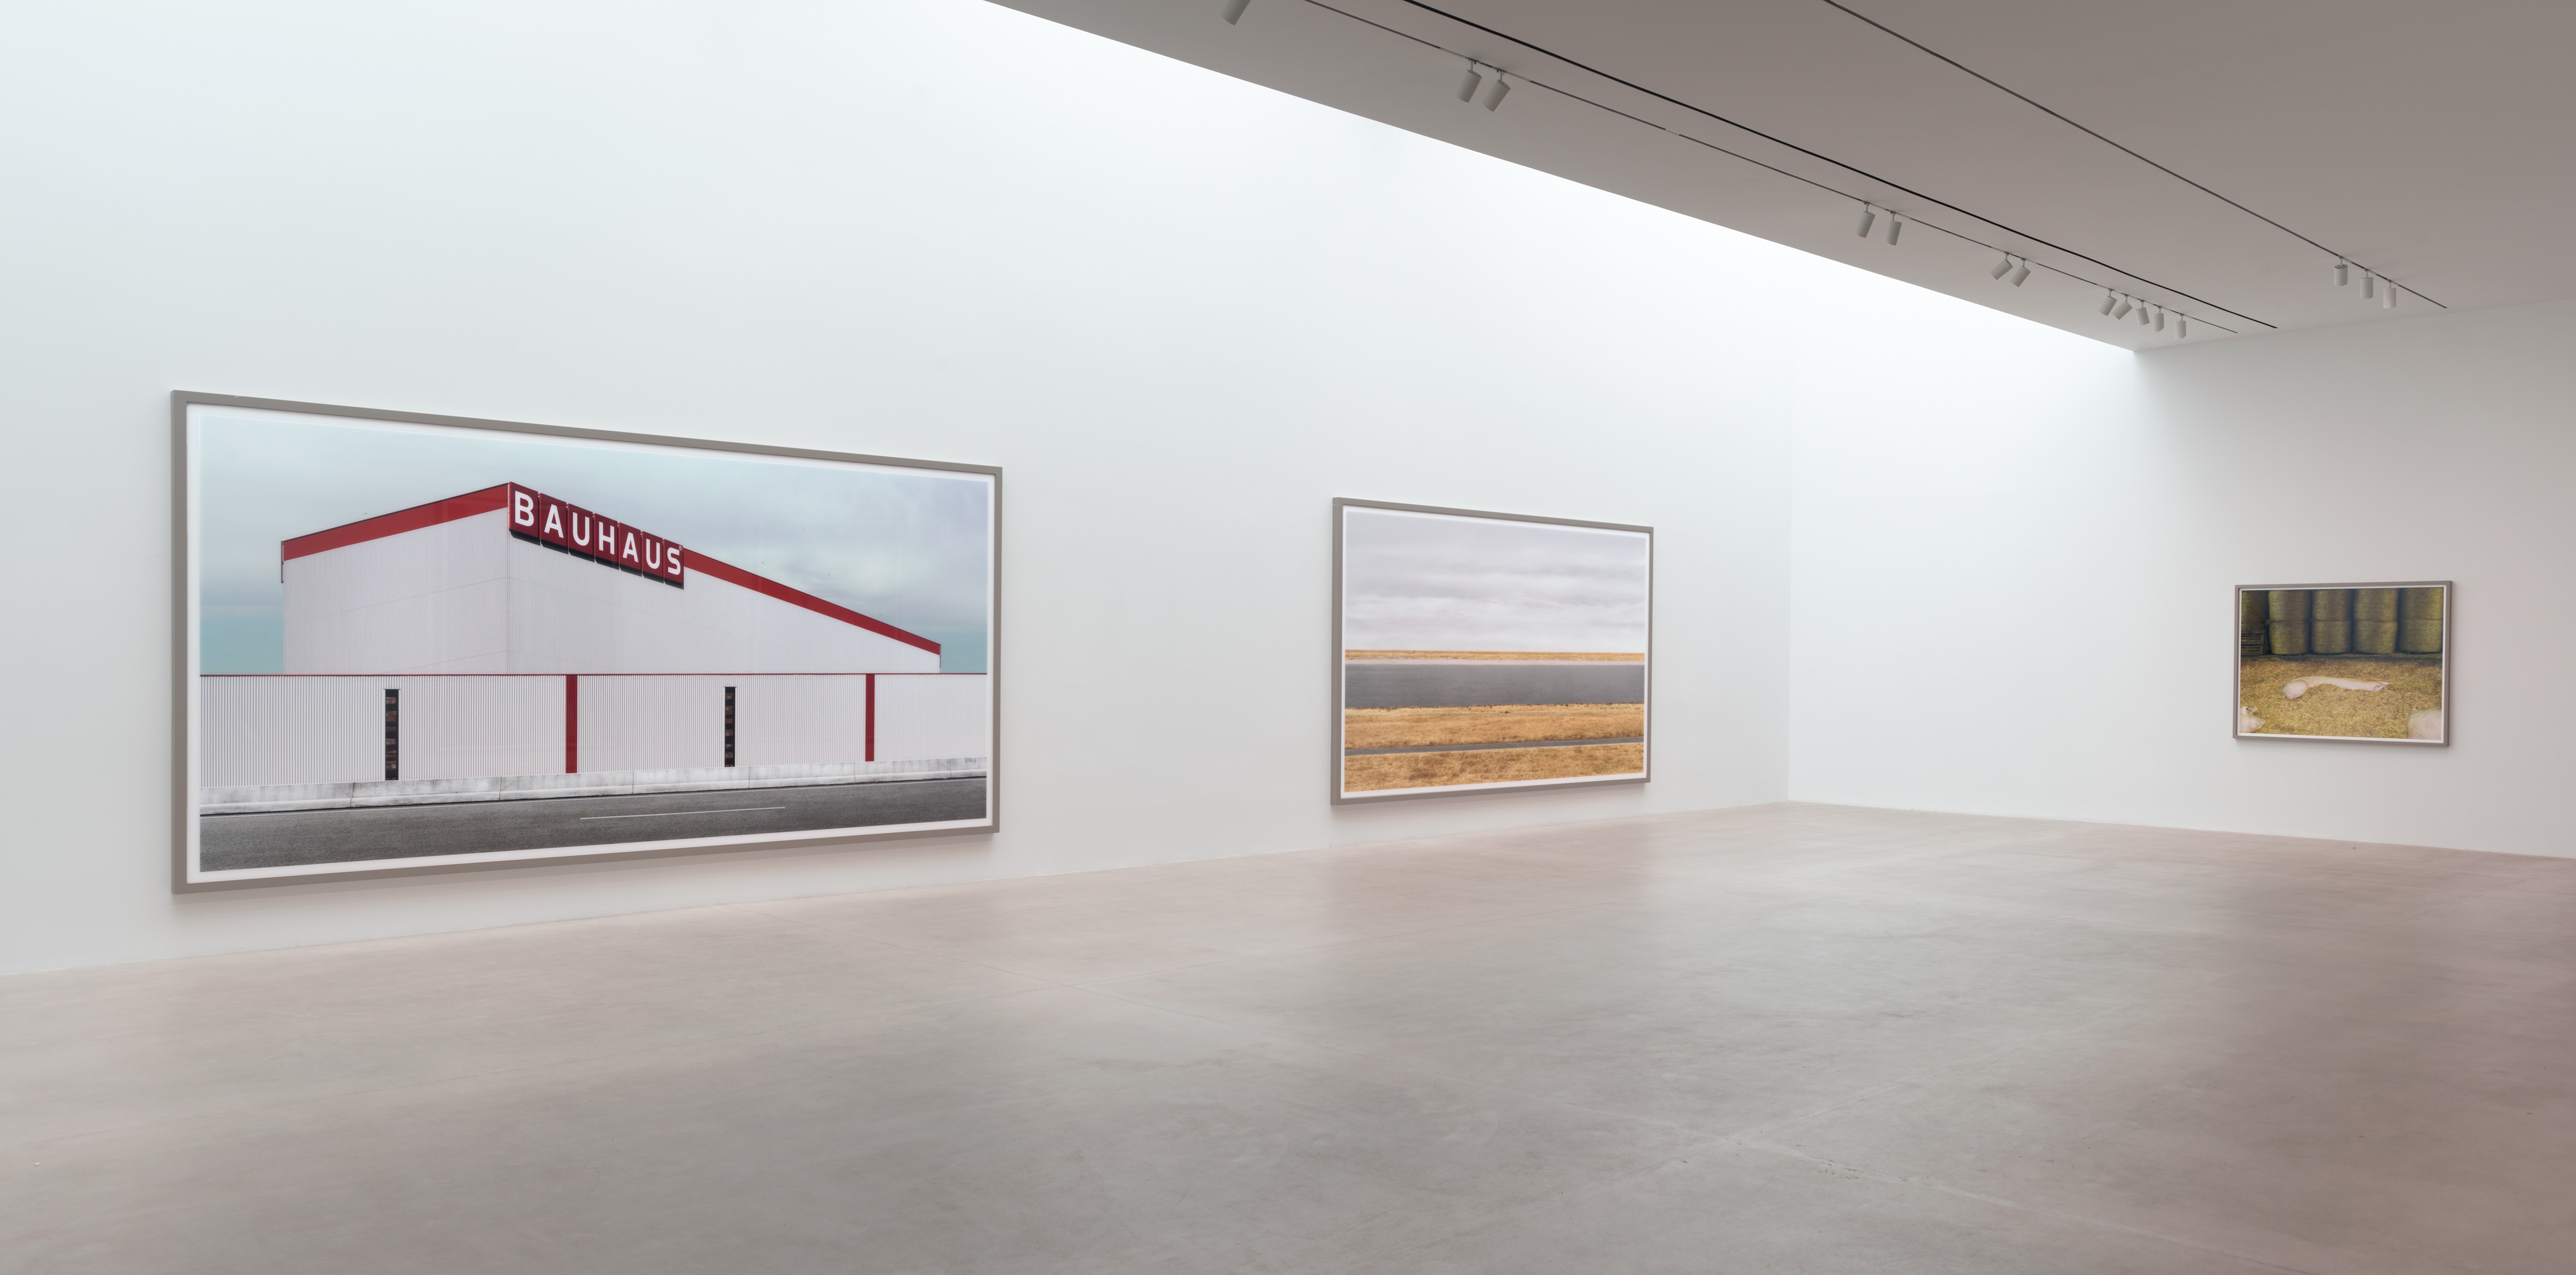 Andreas Gursky, 541 West 24th Street, New York, May 5–July 29 